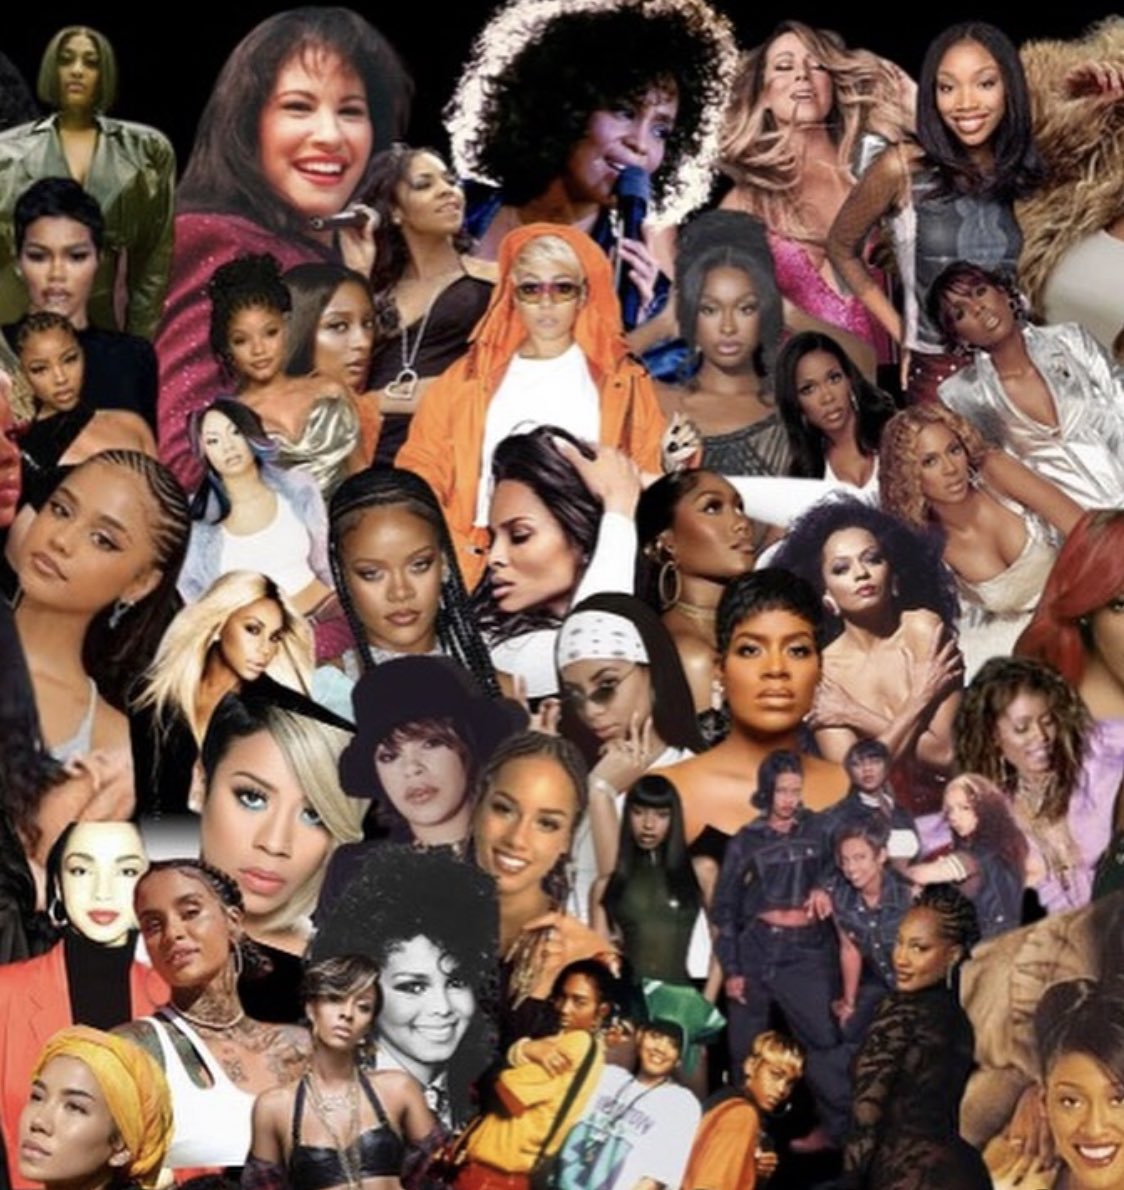 Queen Naija includes @Ciara in a collage of woman she respects & look up to ❤️🎤 “a moment of homage to some women who paved the way & girlies thriving today 🫶🏆” #CelebsLoveCiara